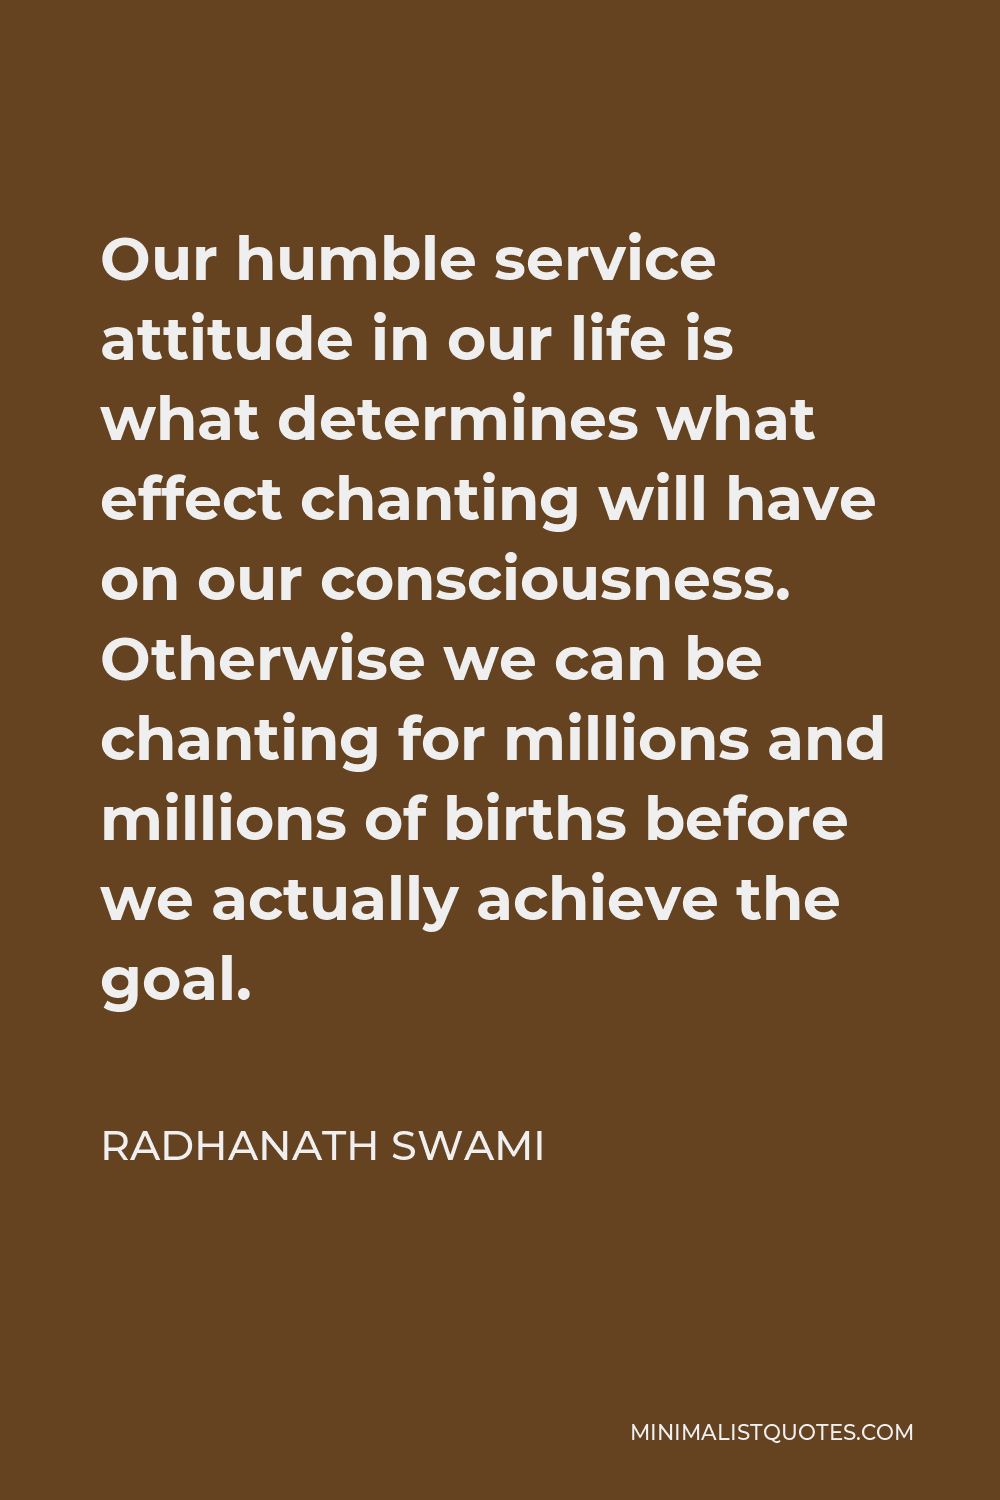 Radhanath Swami Quote - Our humble service attitude in our life is what determines what effect chanting will have on our consciousness. Otherwise we can be chanting for millions and millions of births before we actually achieve the goal.